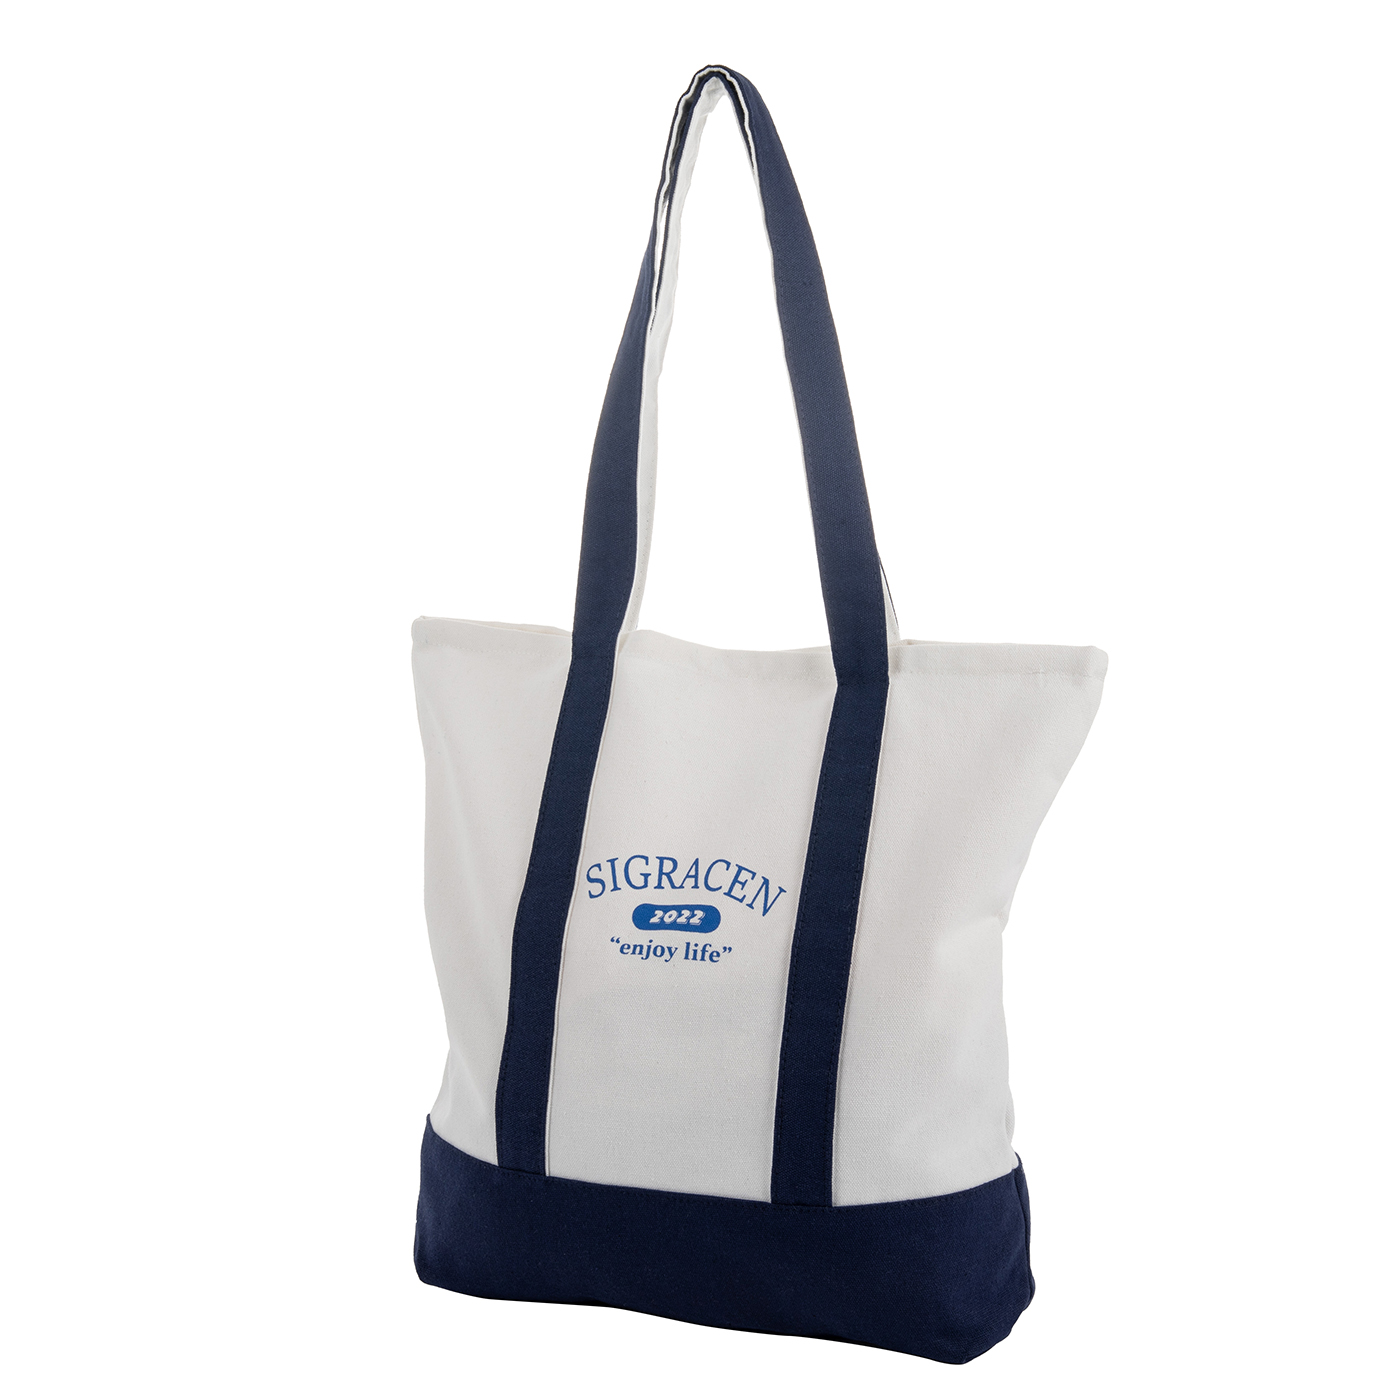 12 oz. Cotton Canvas Boat Grocery Shopping Bag1